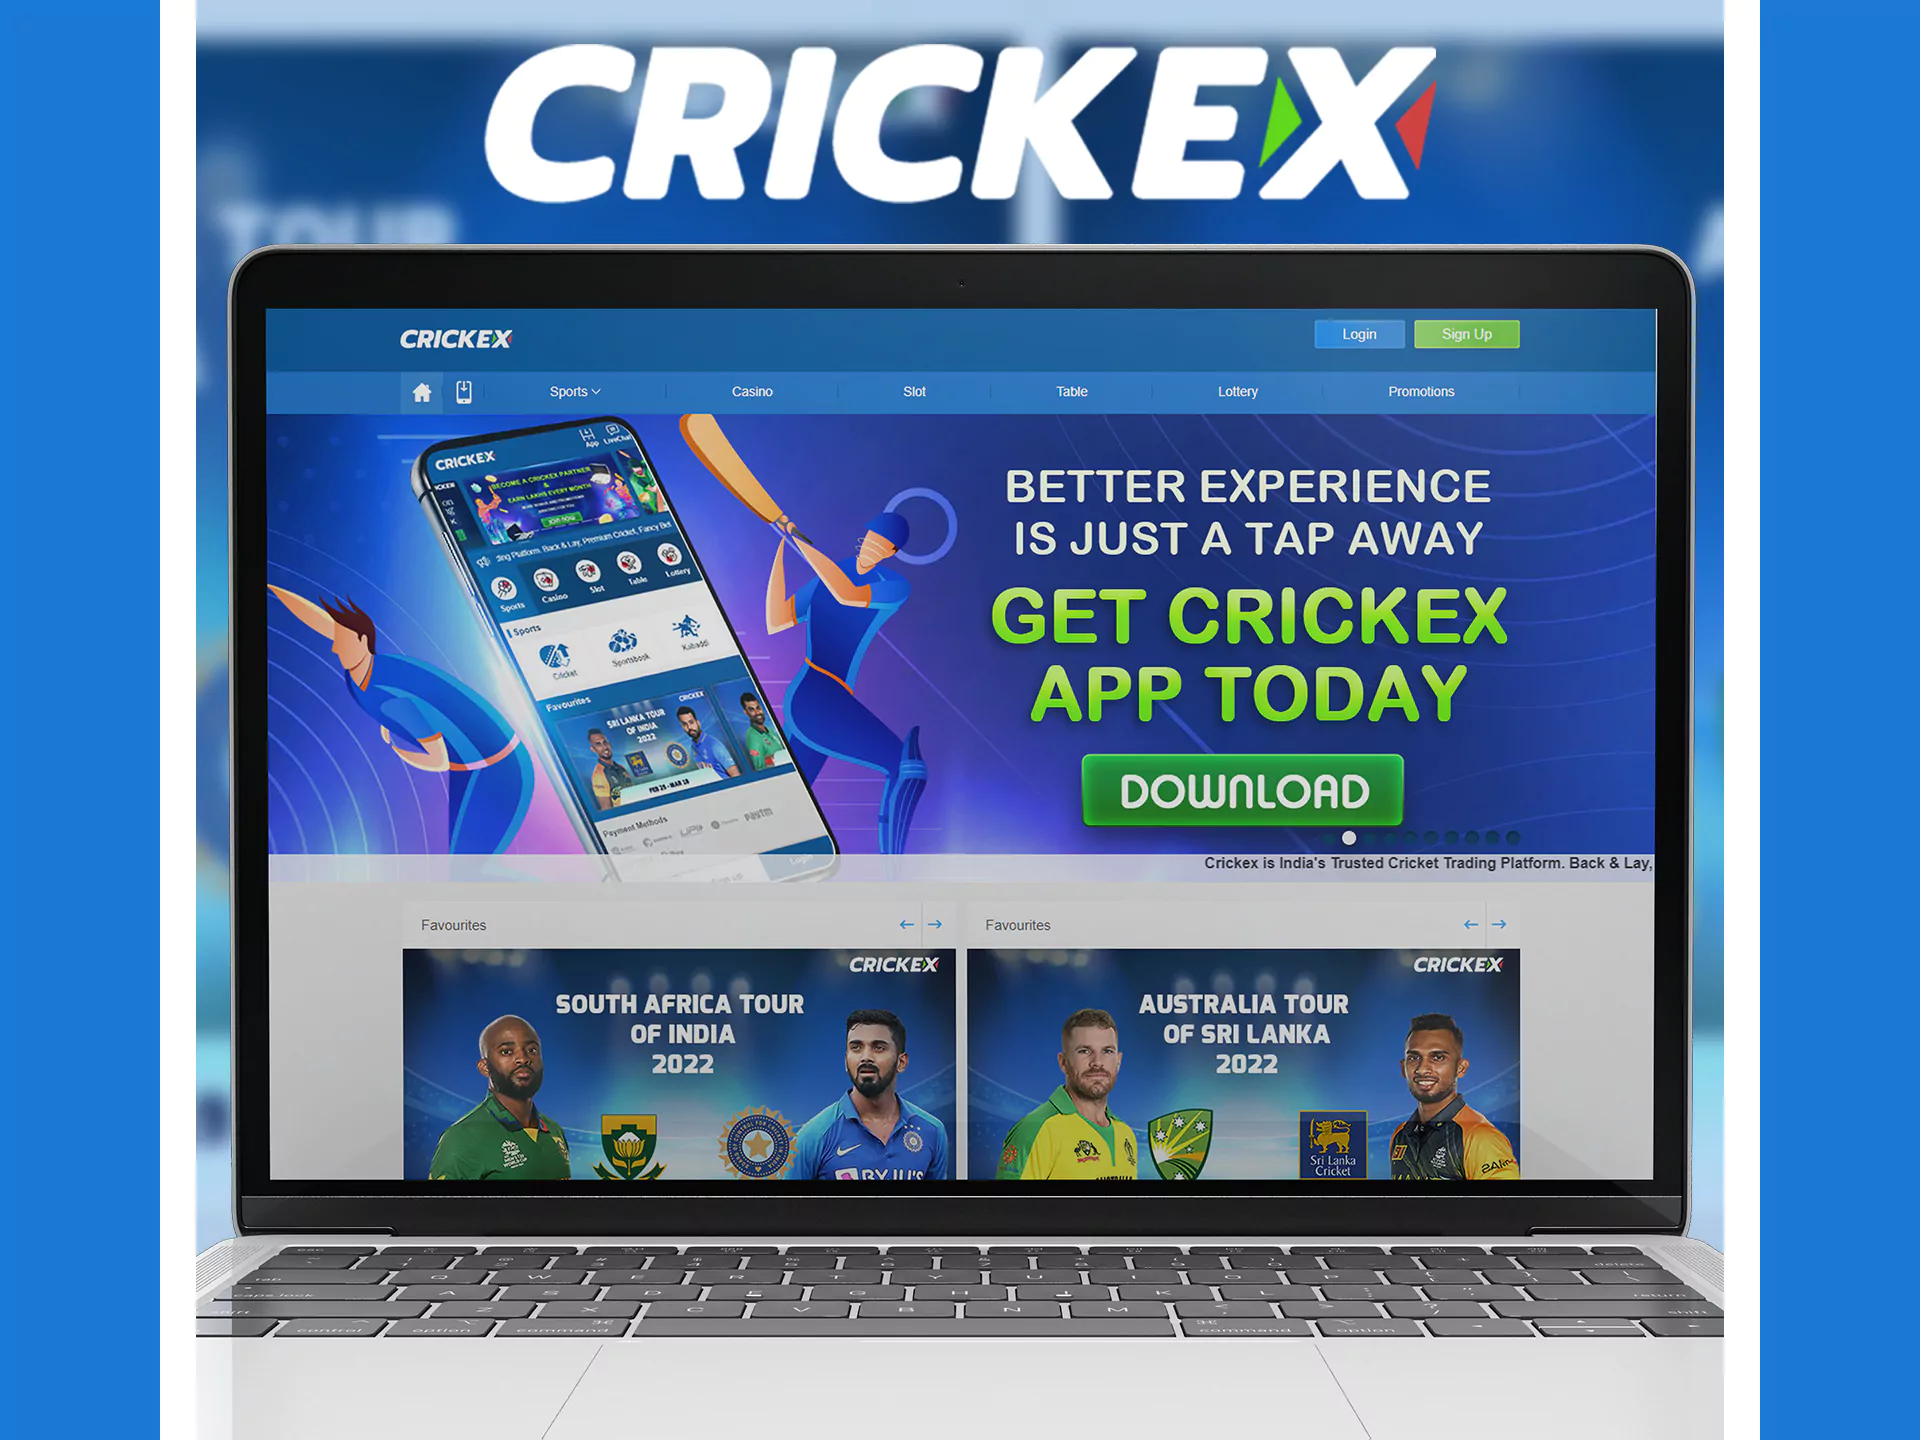 The mobile version of the Crickex site is similar to the app.